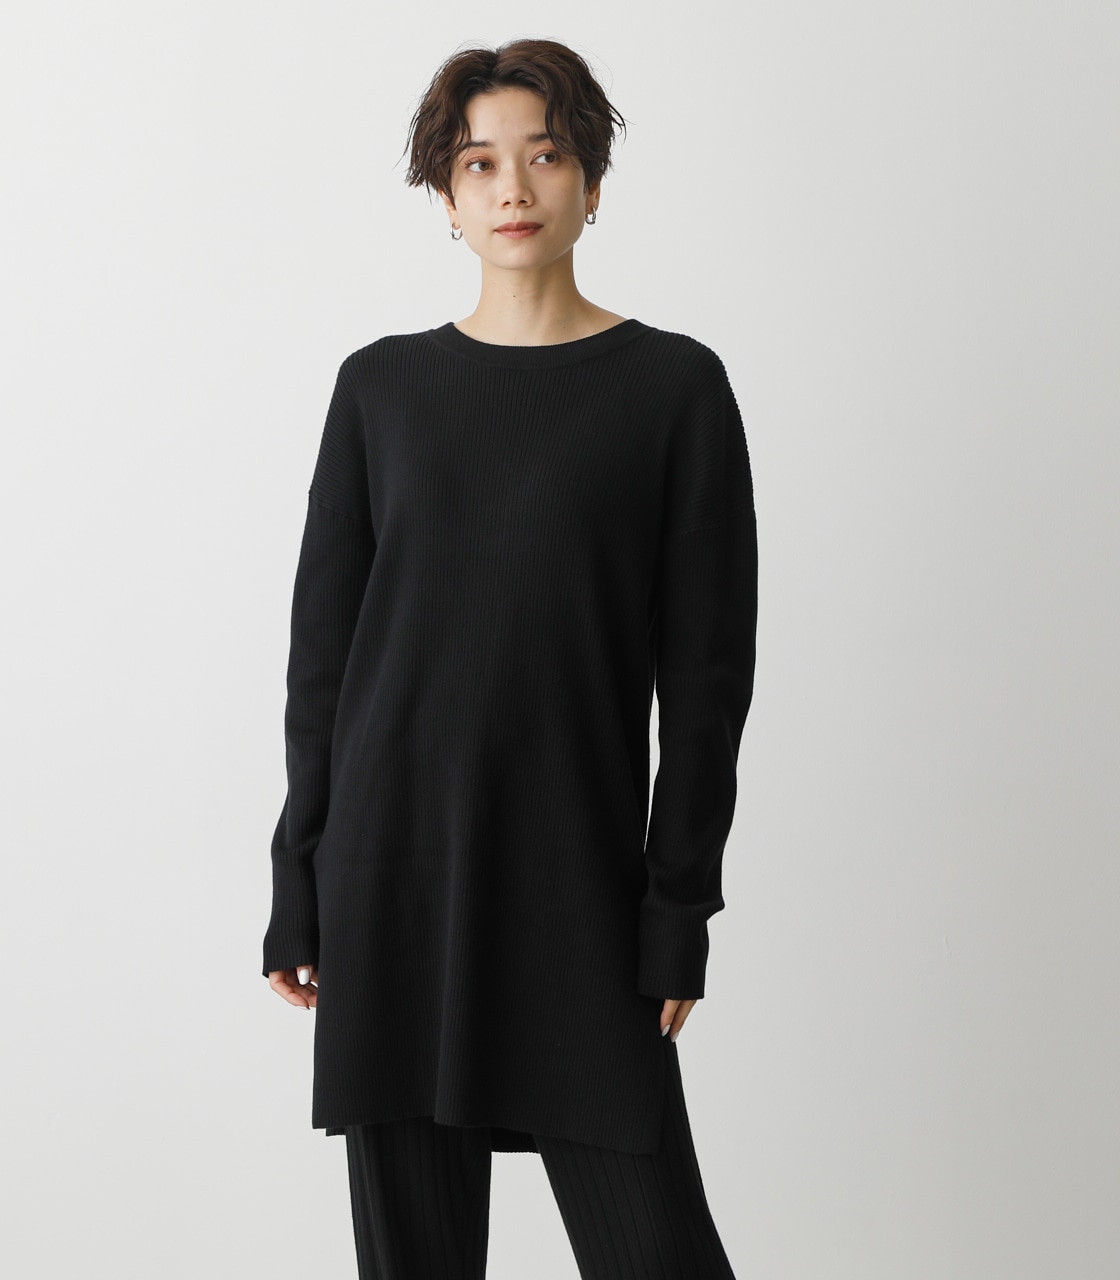 2WAY RIB KNIT LONG TOPS/2WAYリブニットロングトップス 詳細画像 BLK 5